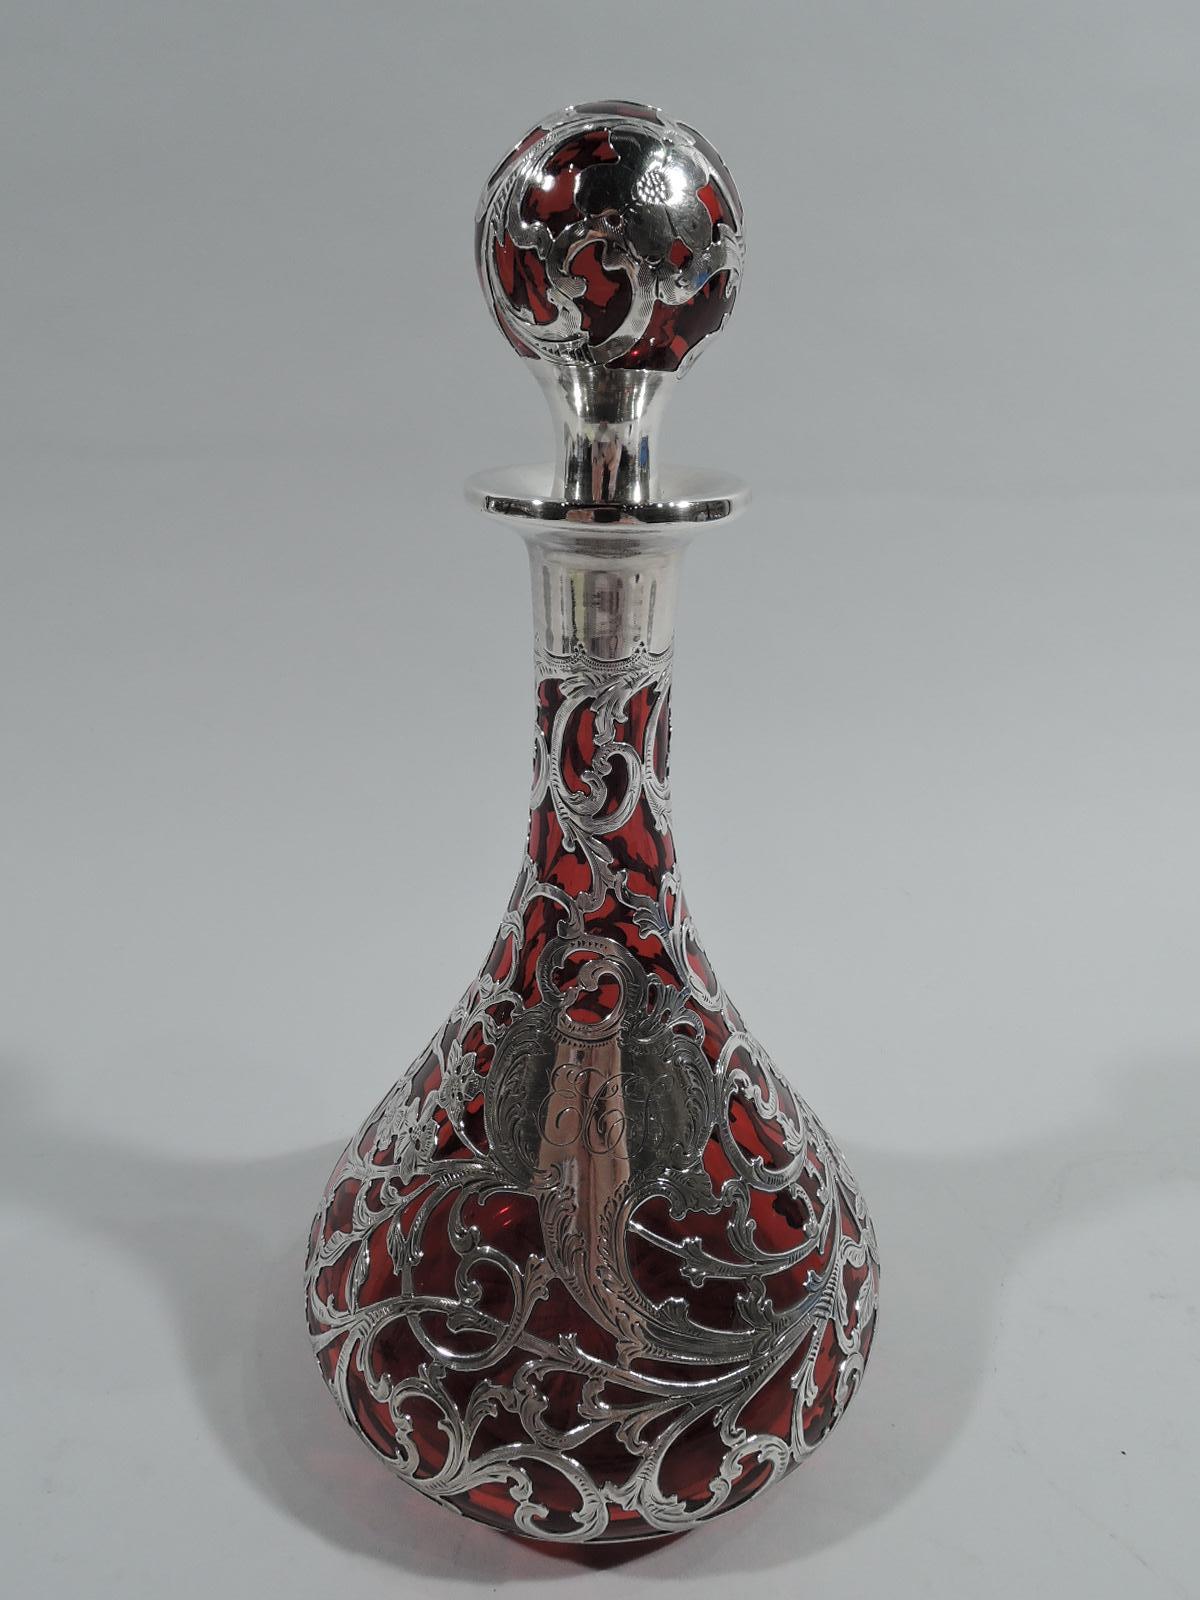 Turn-of-the-century Art Nouveau glass decanter with engraved silver overlay. Made by Alvin in Providence. Conical bowl and cylindrical neck with everted rim. Star cut to underside. Ball stopper with spool neck. Dense and entwined flowering